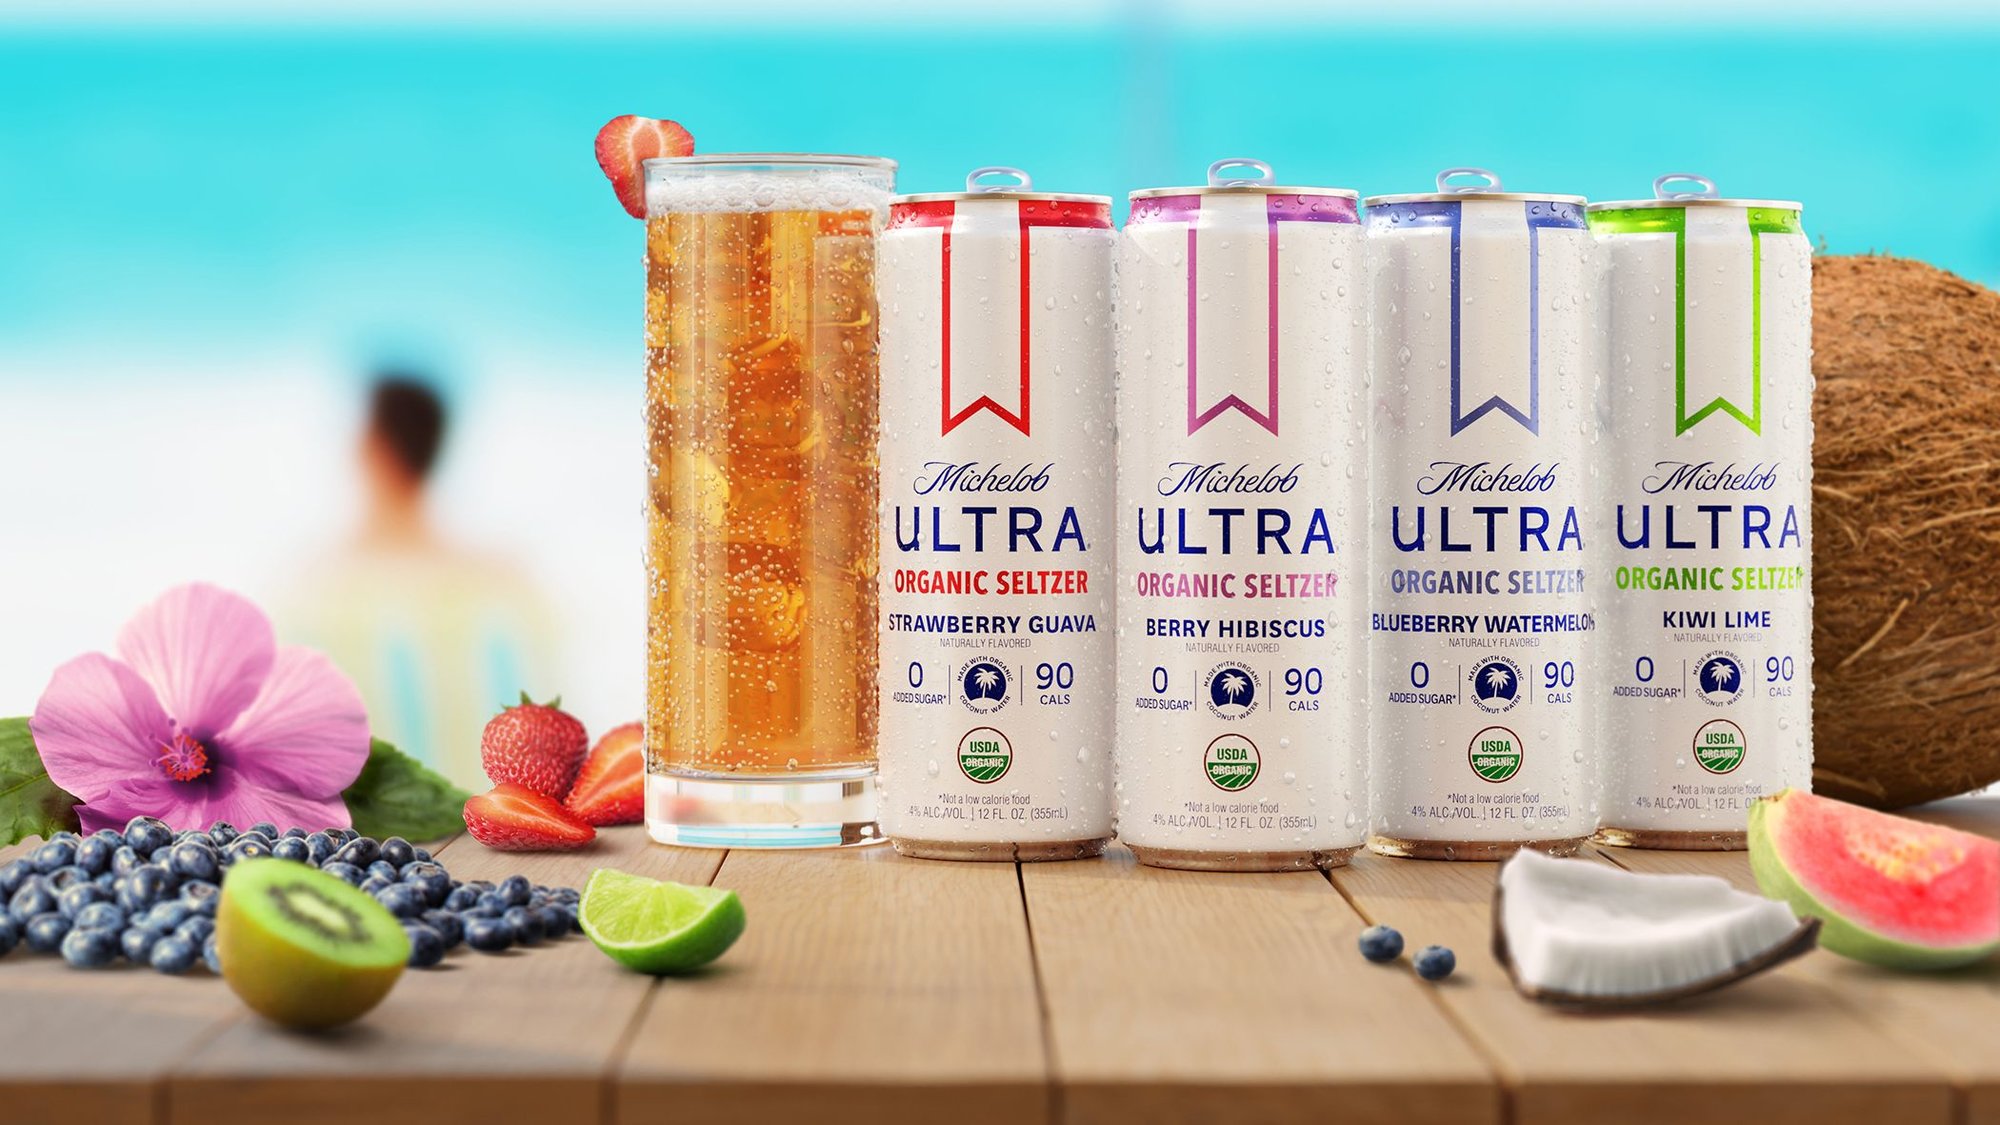 This is the main background for the Michelob Ultra Organic Seltzer Black Cherry